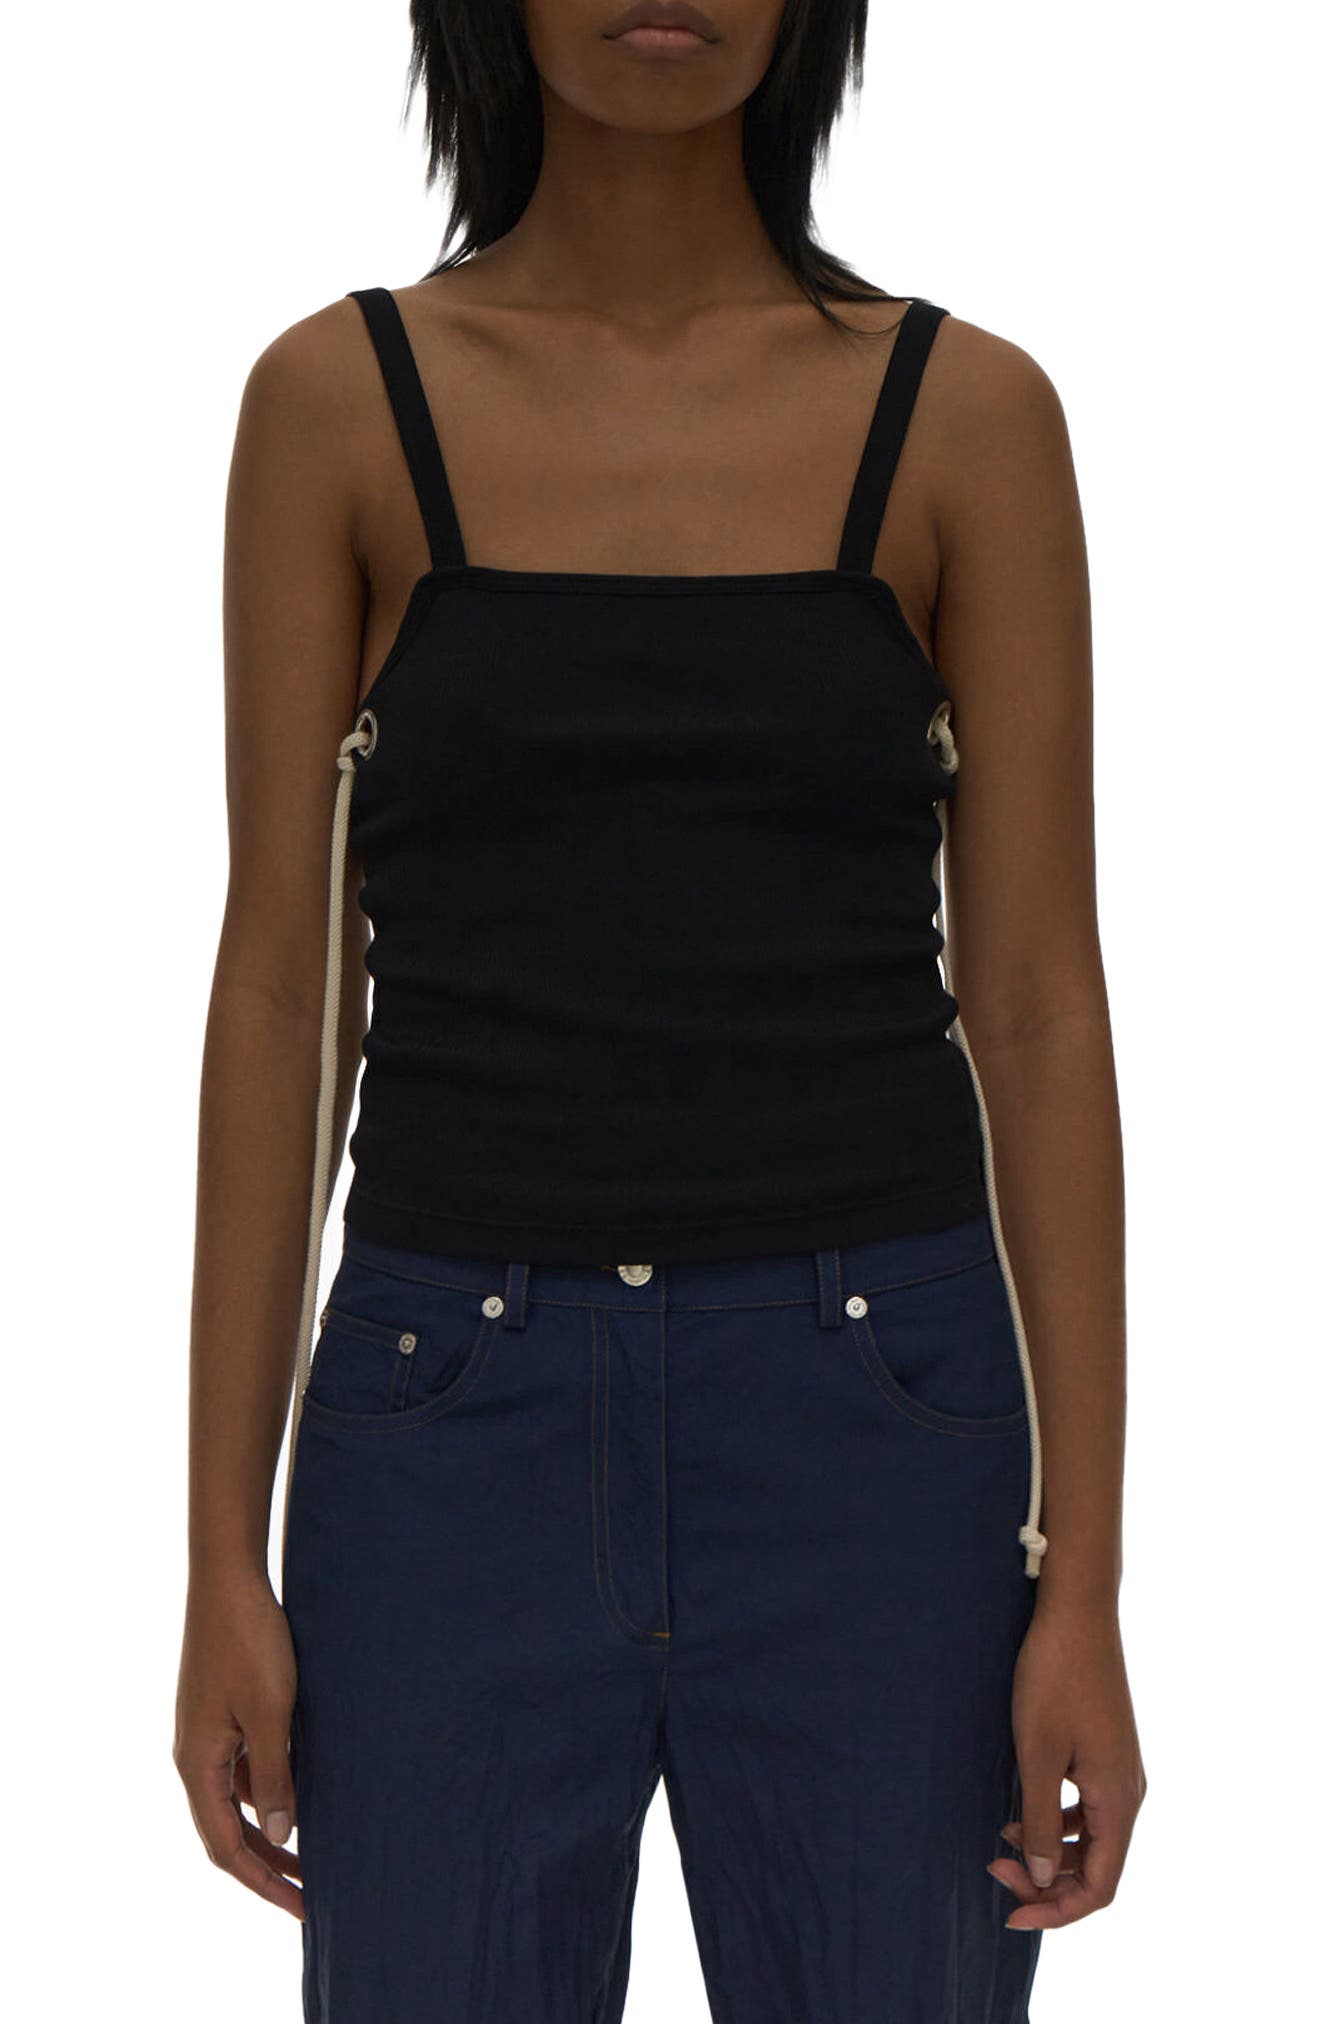 Helmut Lang Rope Accent Cotton Tank in Basalt at Nordstrom, Size Medium